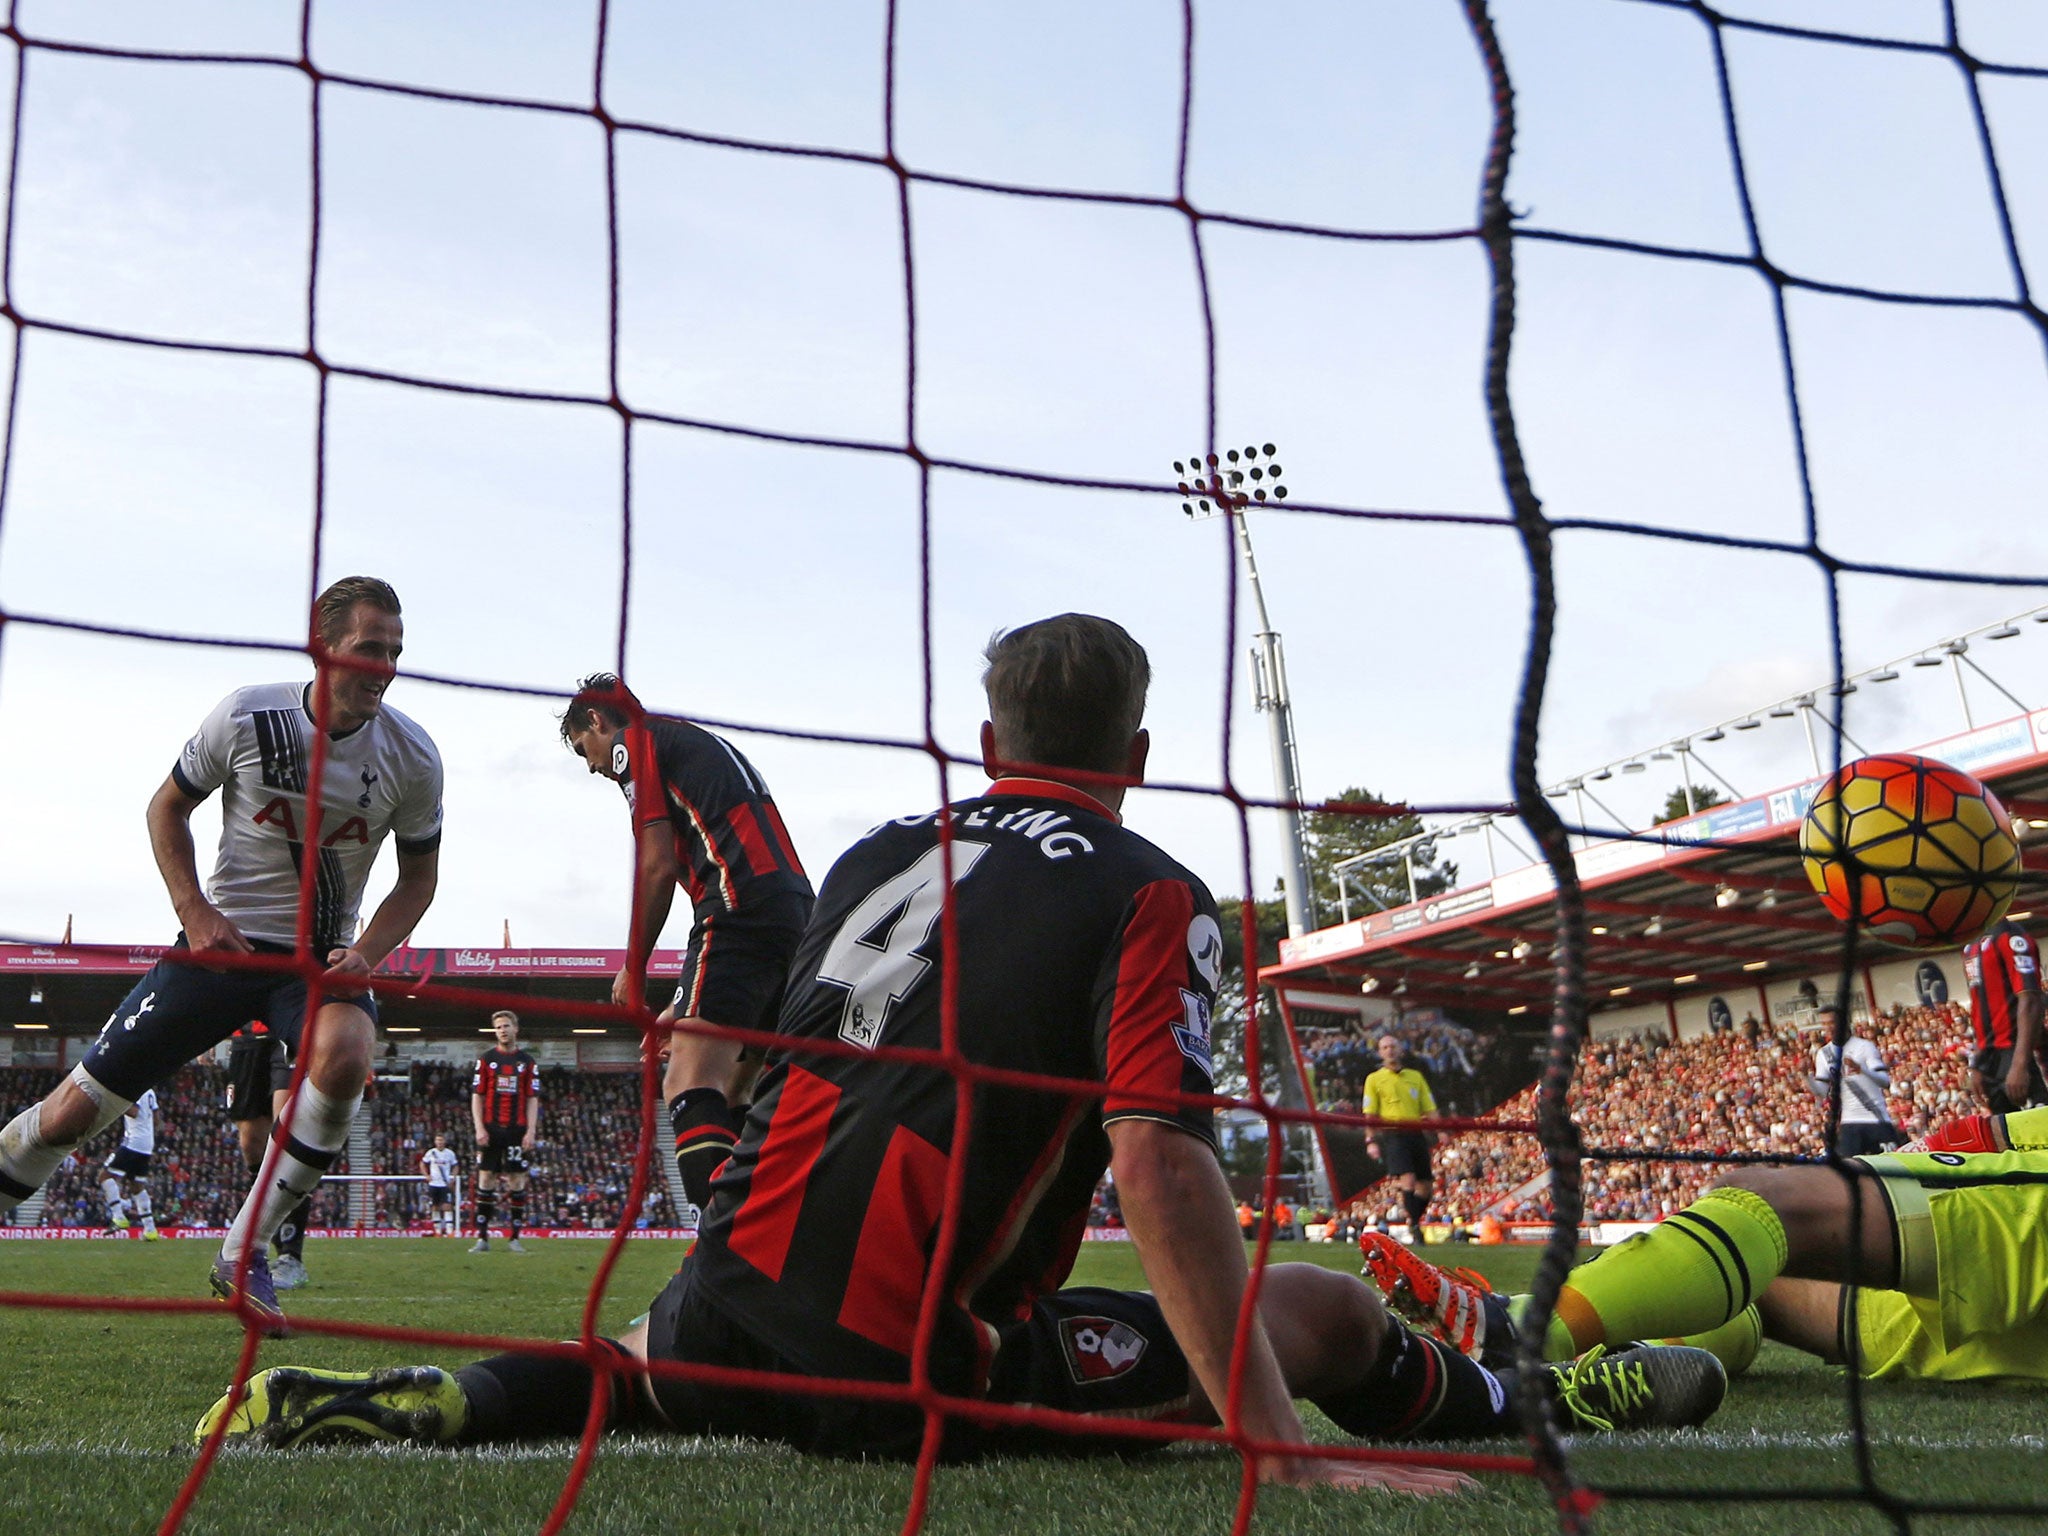 A view of the action during Bournemouth's humiliating defeat to Tottenham